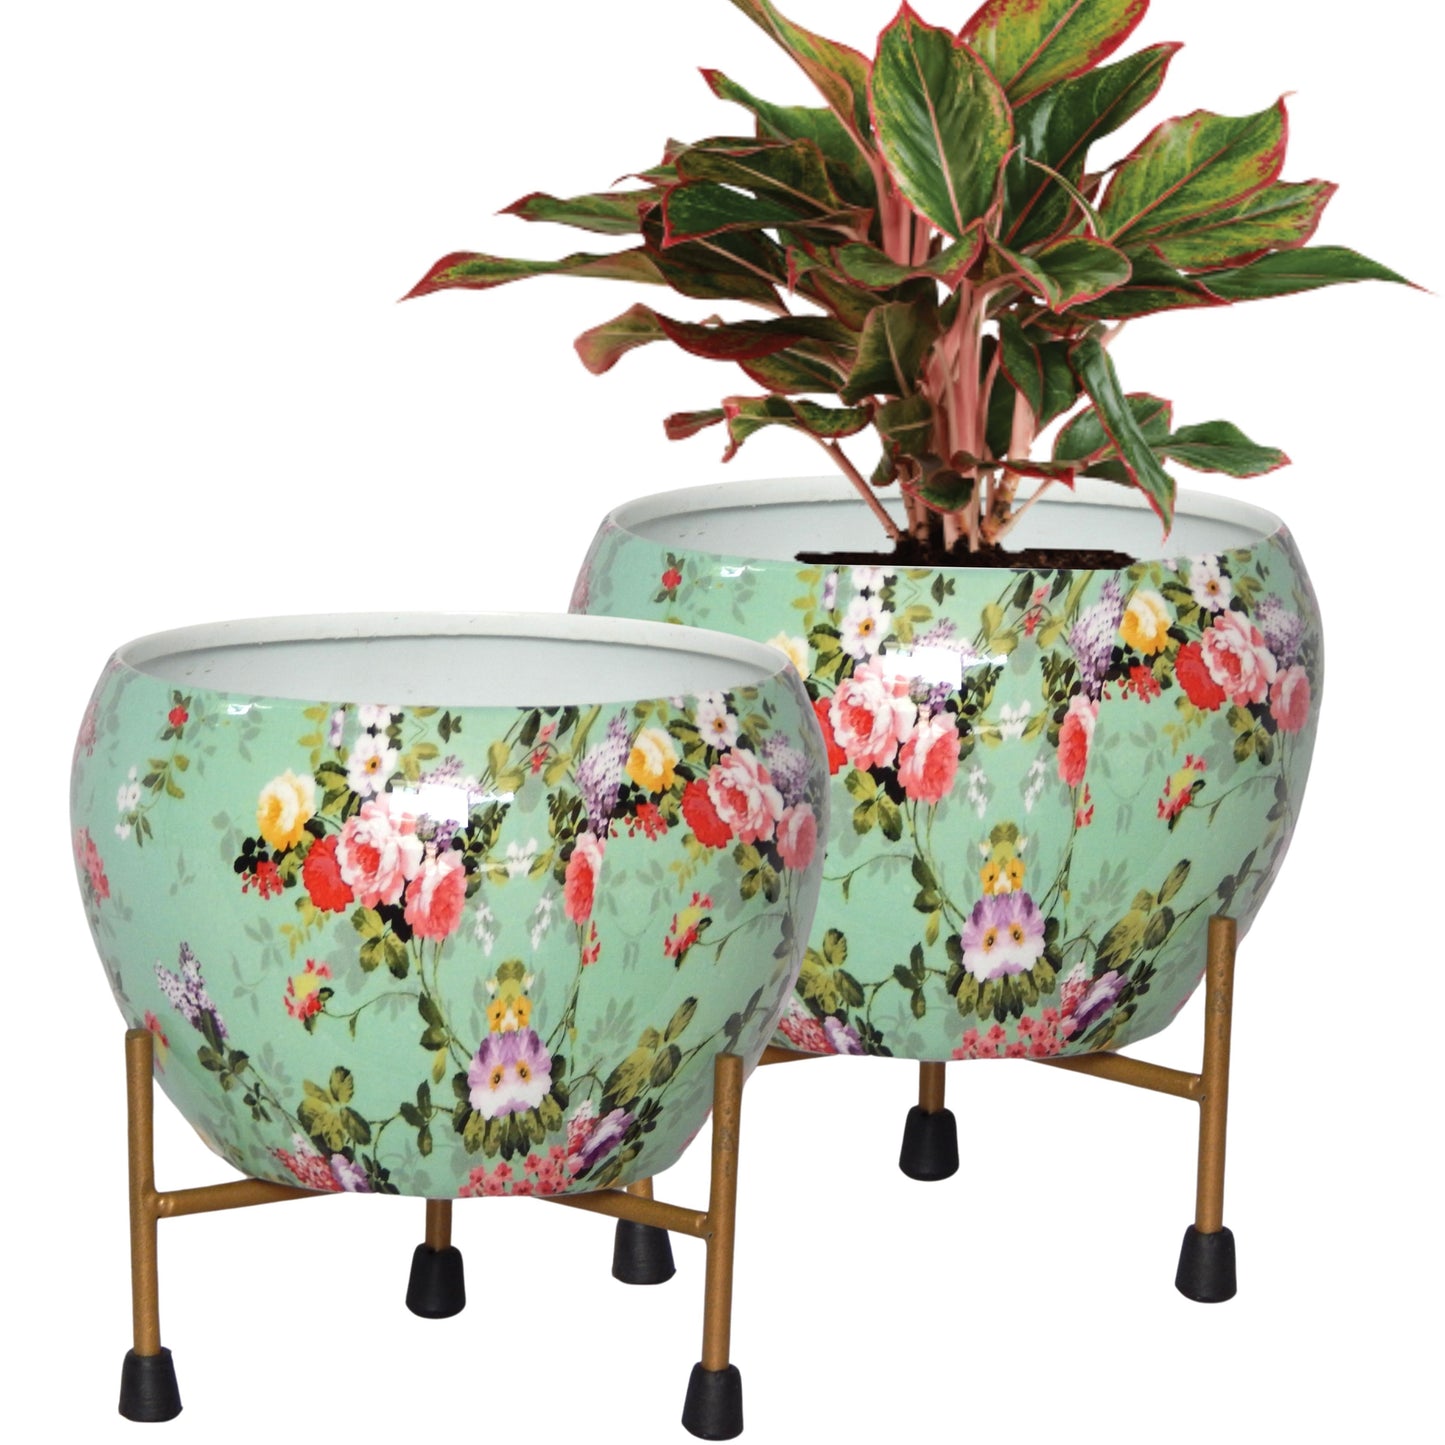 Lio Green Floral Metal Pot with Stand